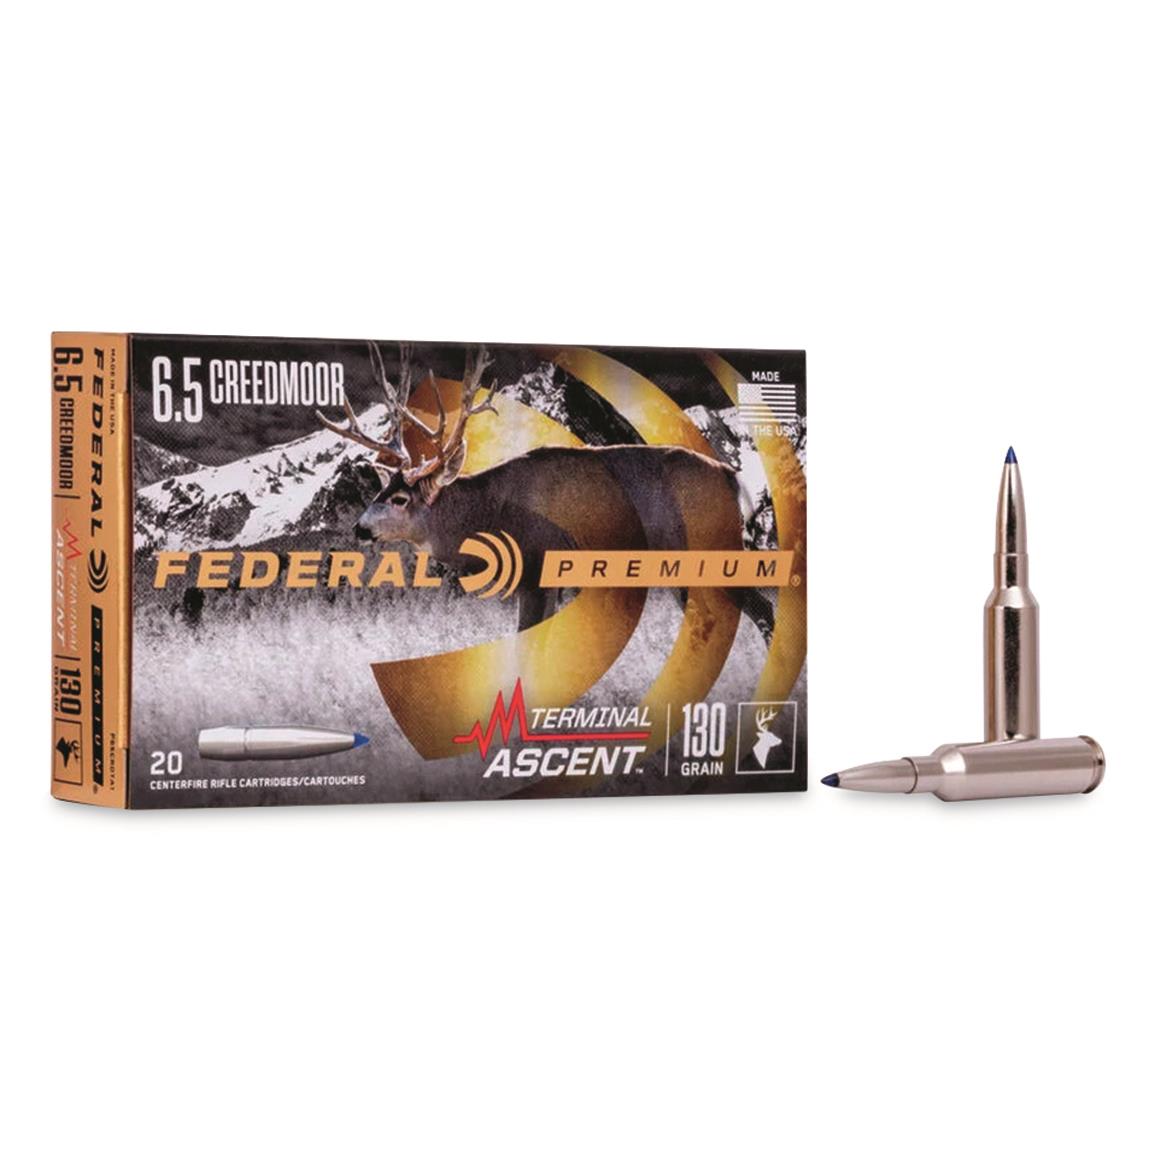 Federal Premium Terminal Ascent, 6.5mm Creedmoor, Bonded Polymer Tip, 130 Grain, 20 Rounds